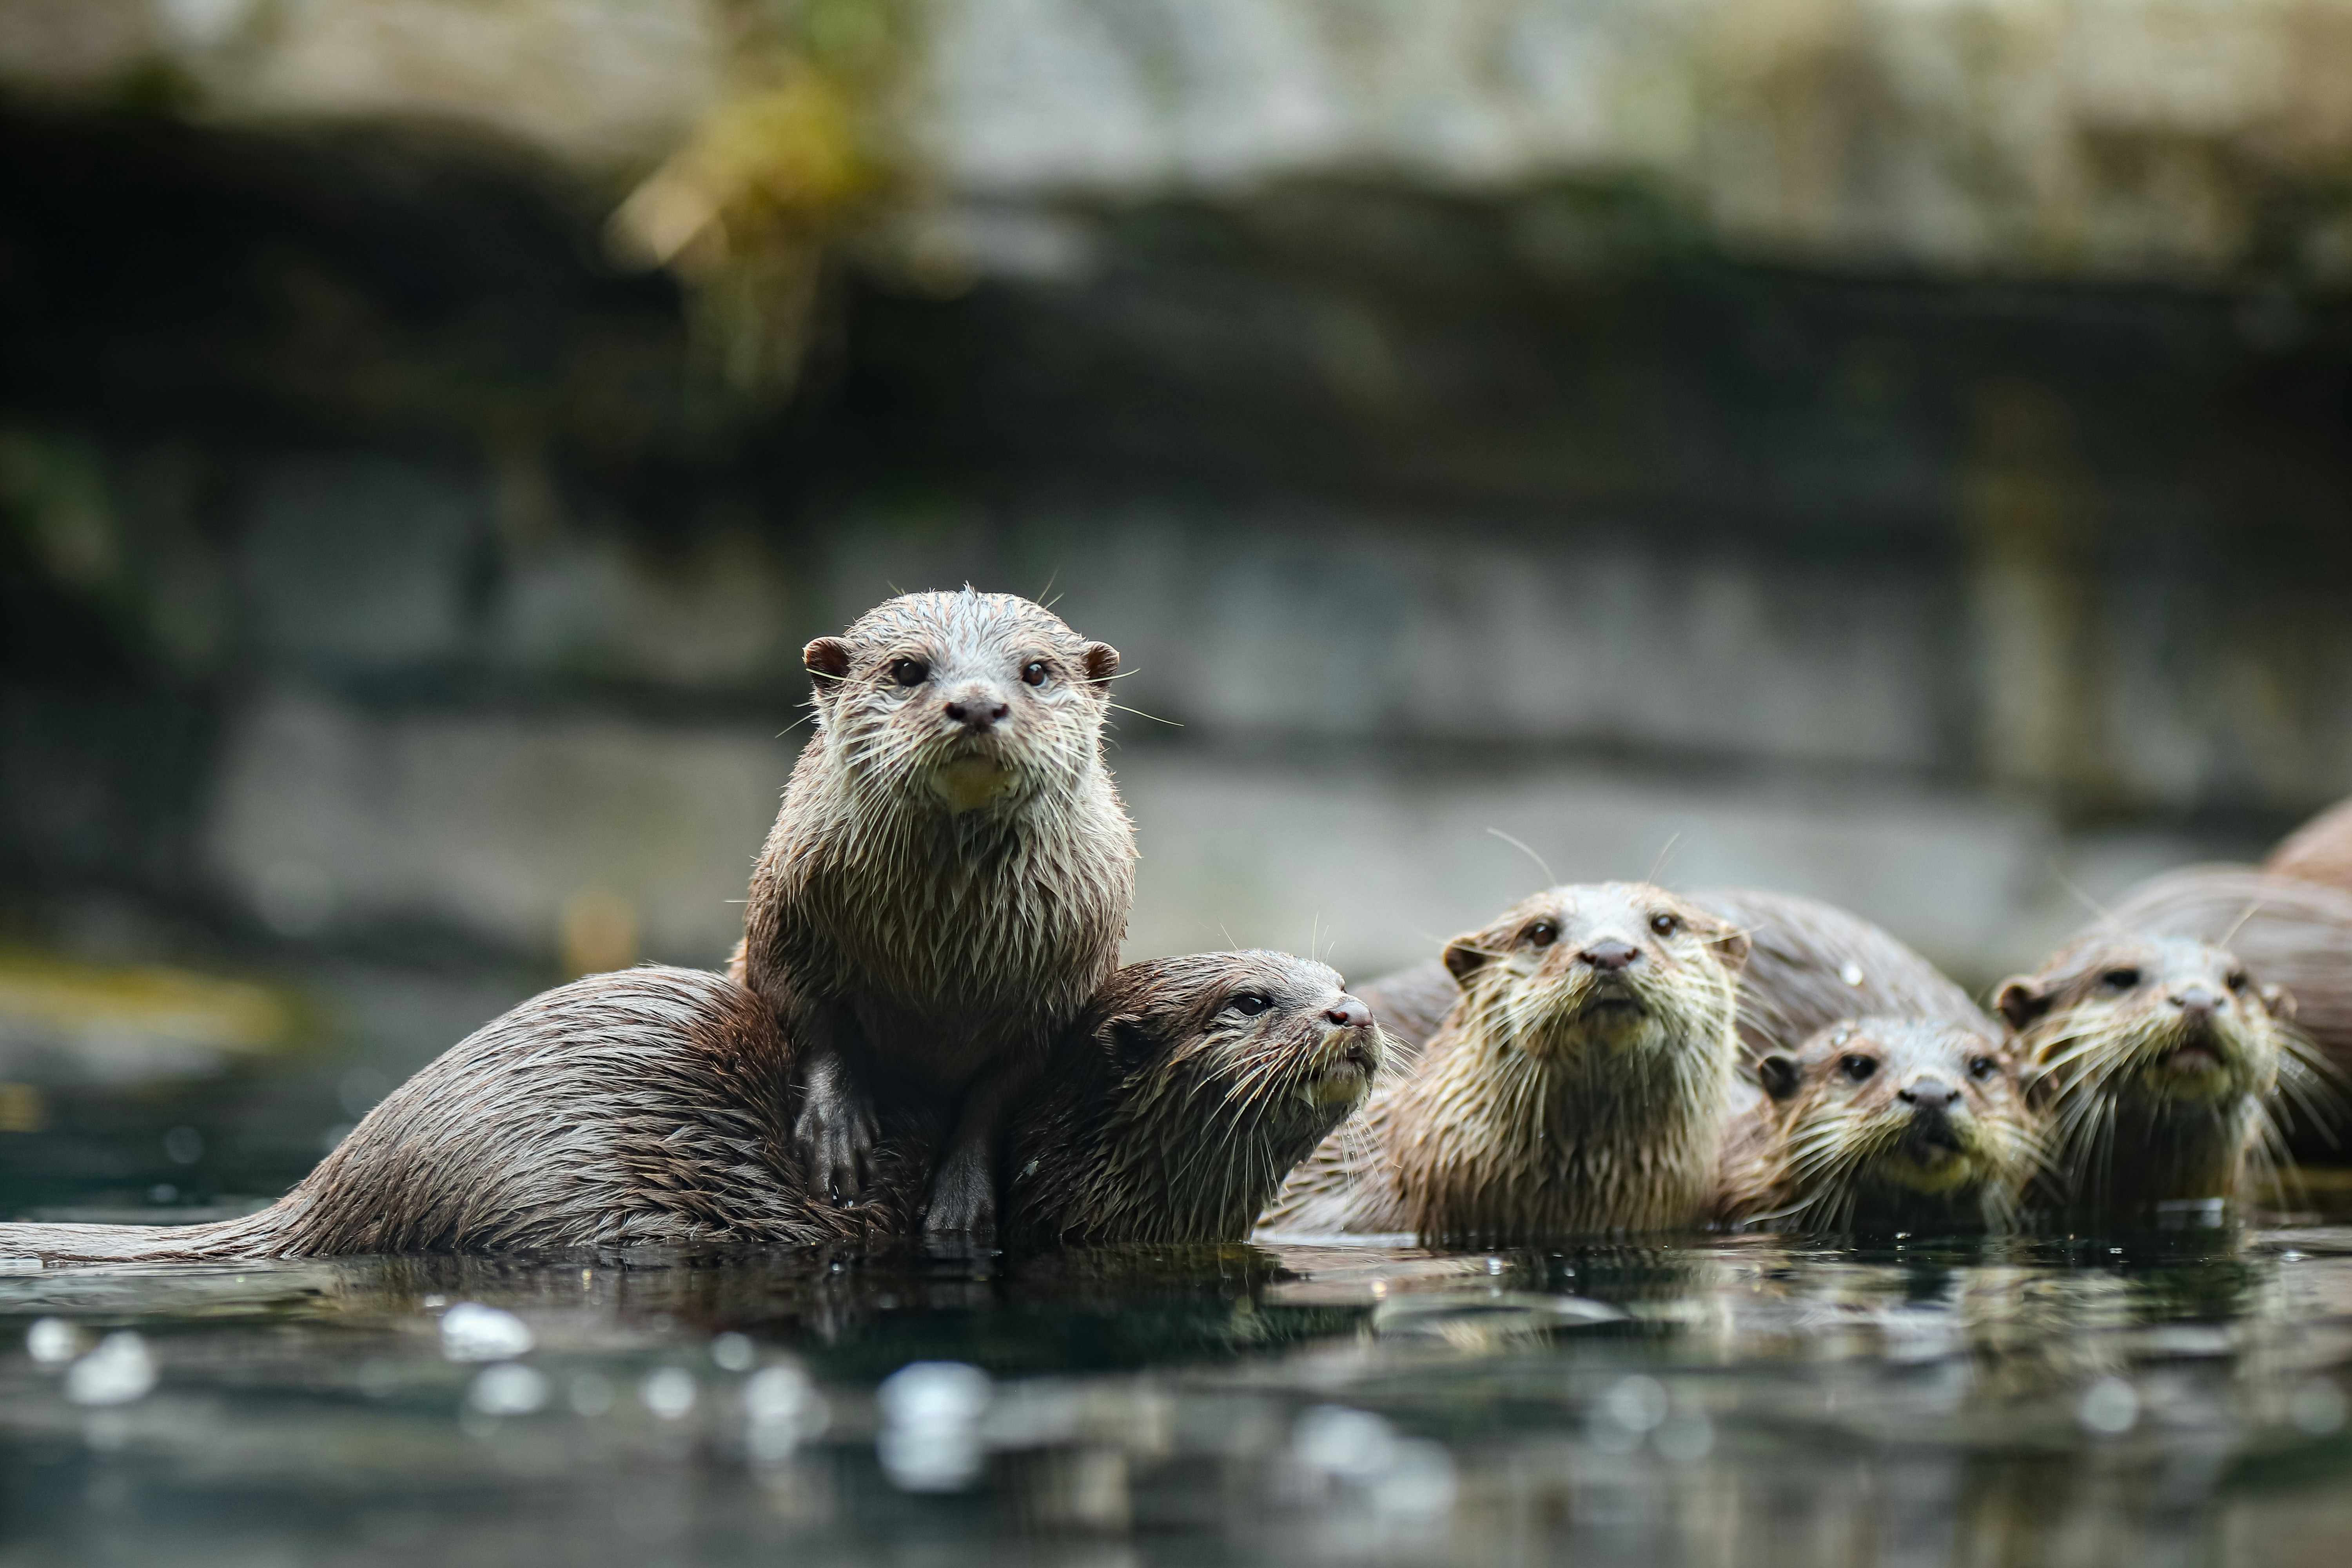 Taken at Ree Safari Park in Ebeltoft, Danmark. Just some awesome Otters.